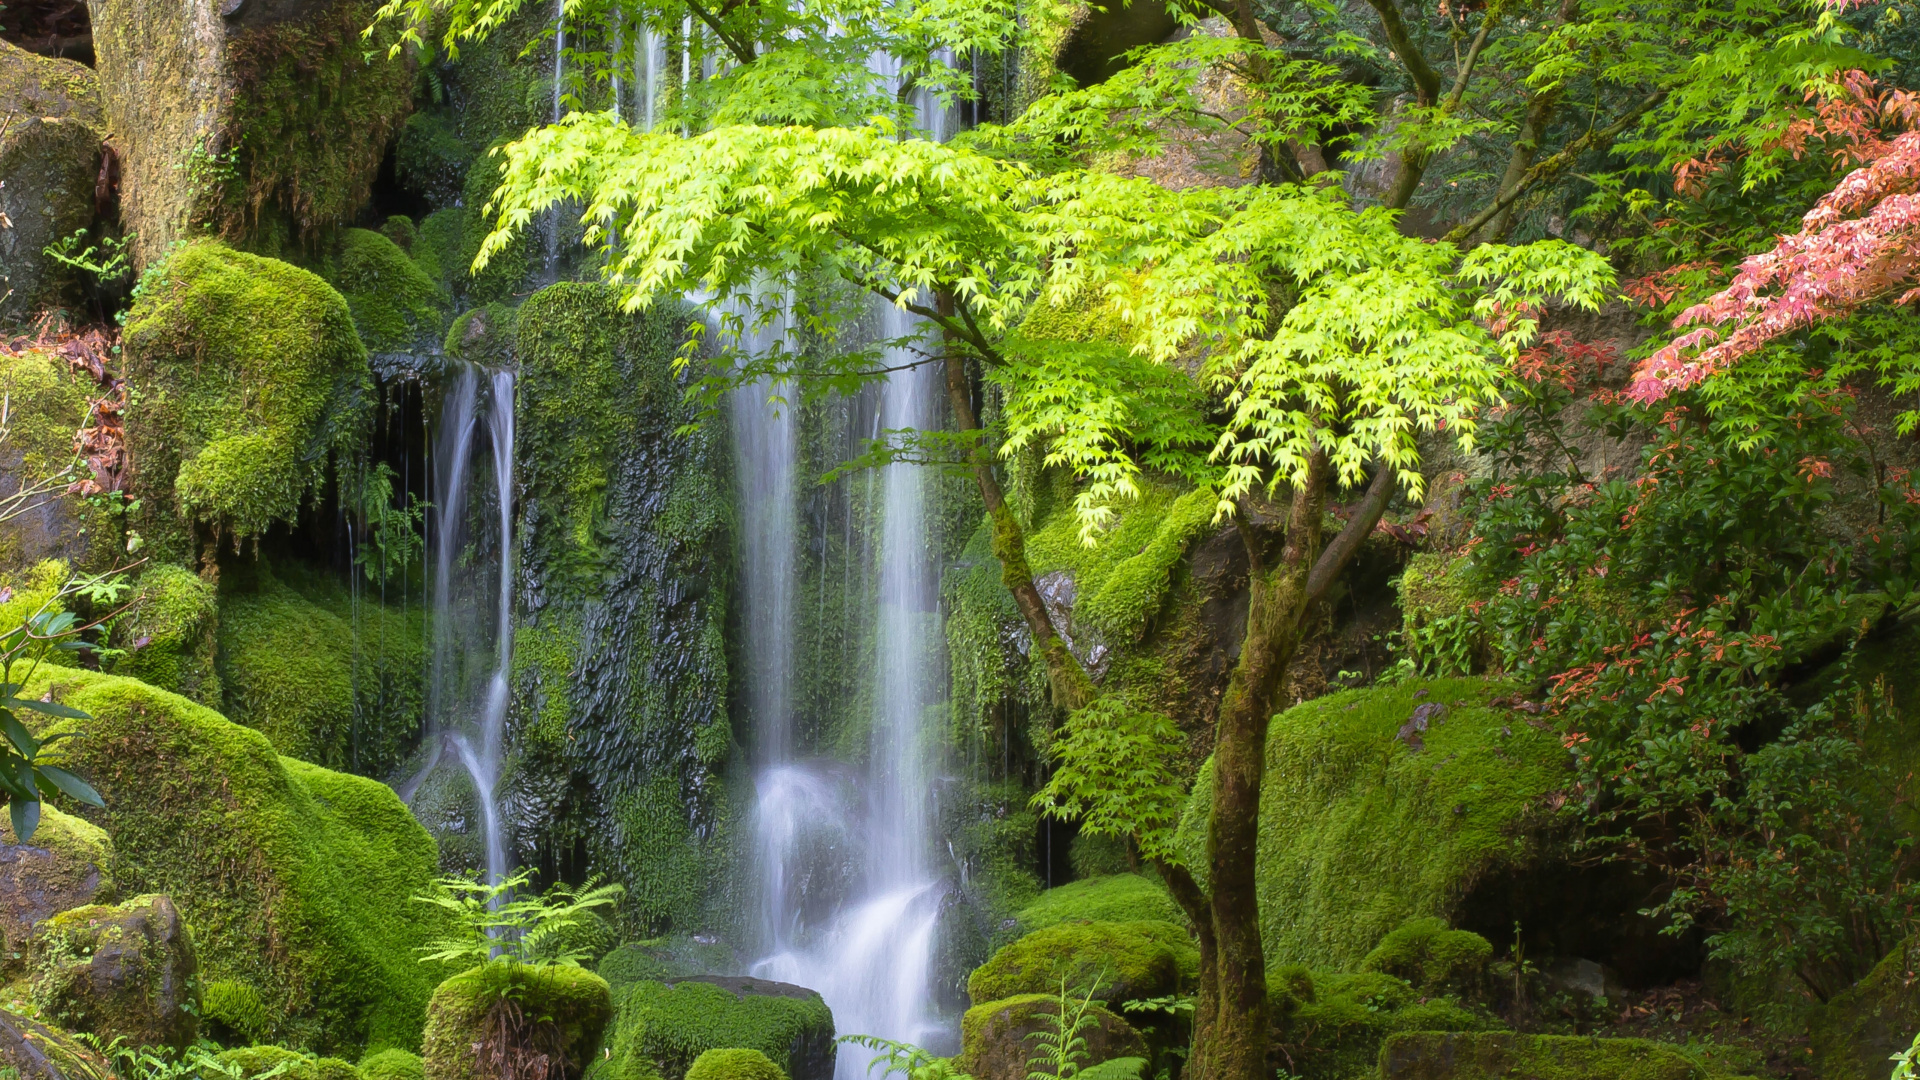 Water Falls in The Forest. Wallpaper in 1920x1080 Resolution